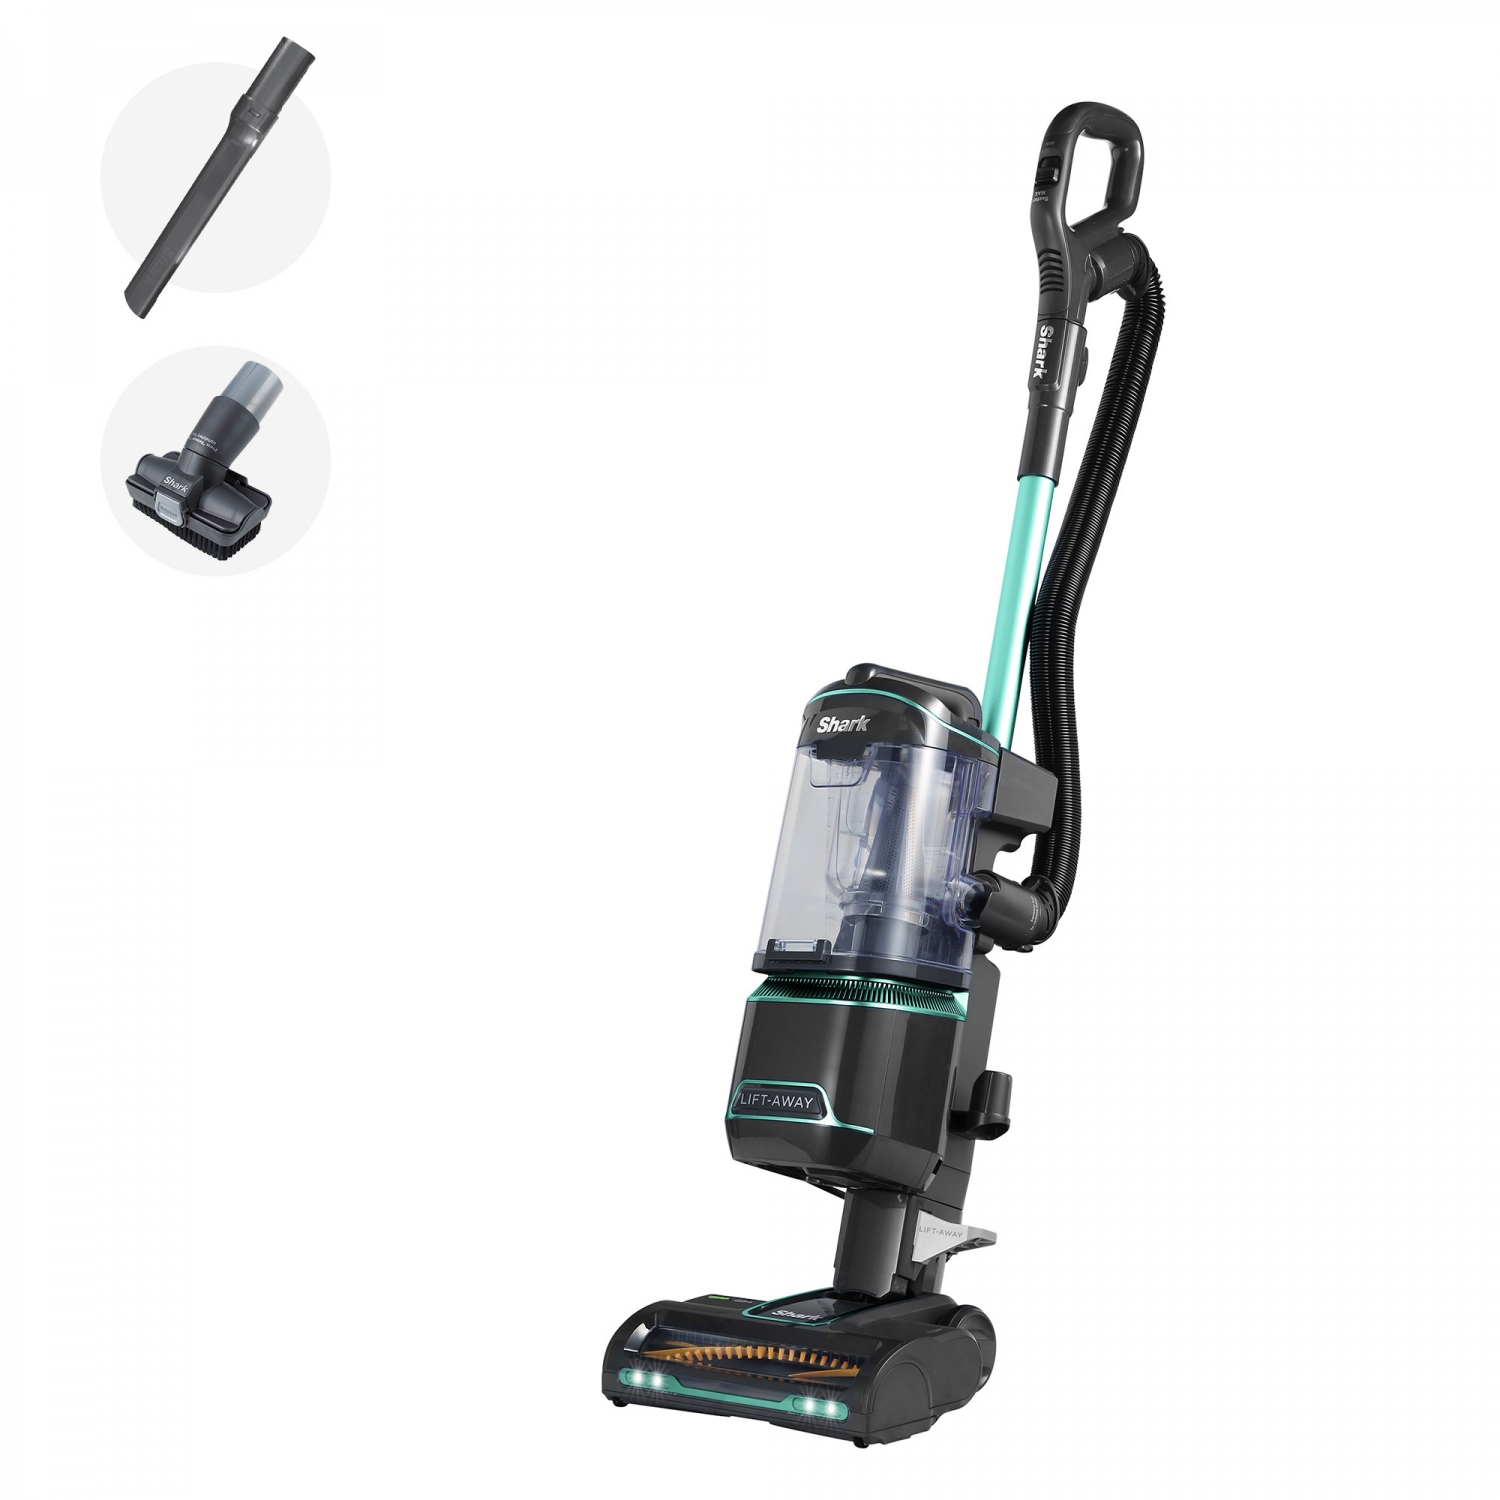 Shark NZ690UK Anti-Hair Wrap Upright Vacuum Cleaner with Lift-Away - Teal - 0